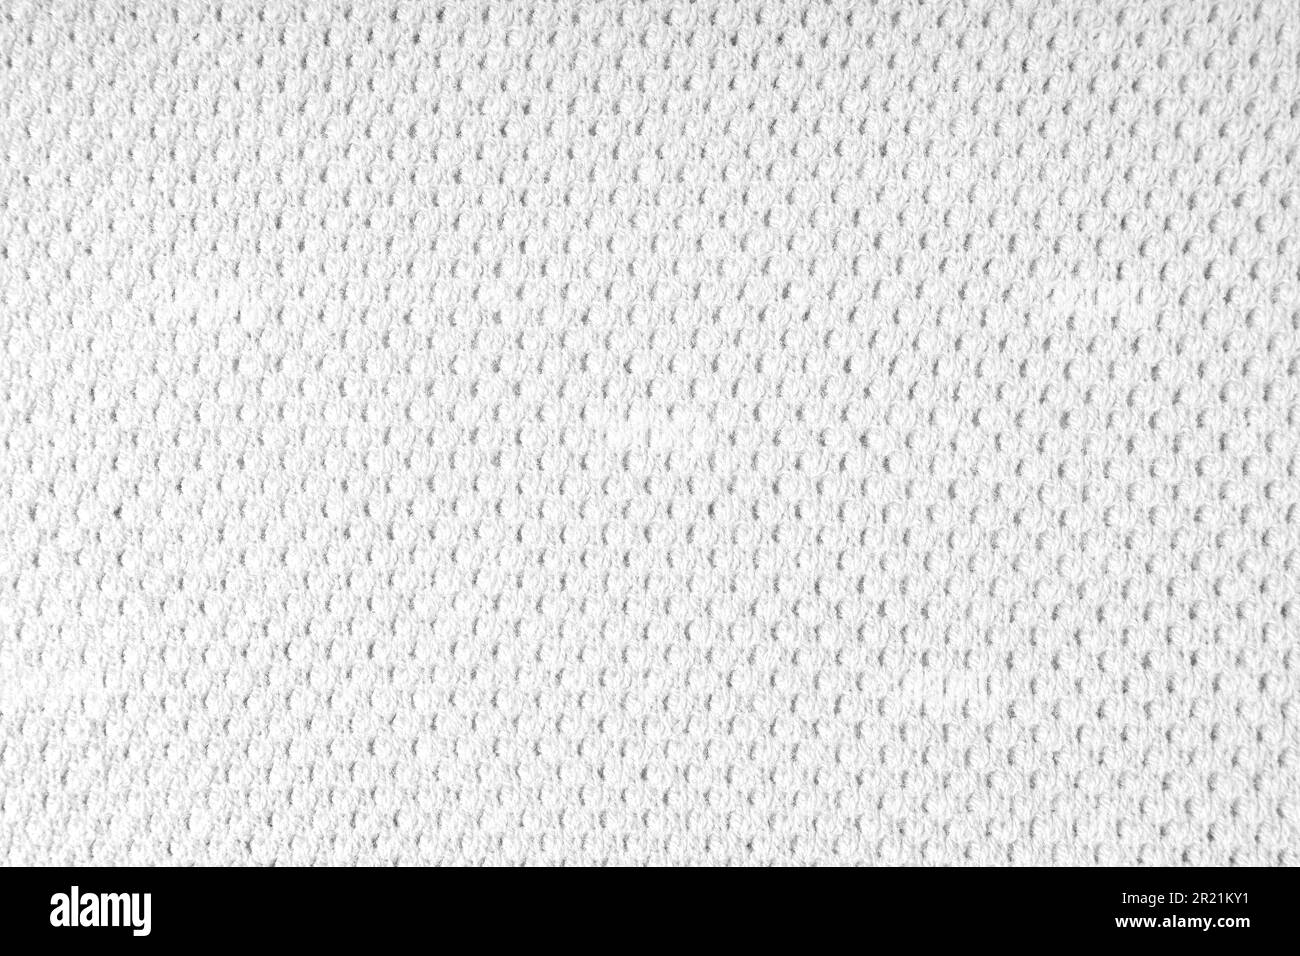 Close up background of knitted wool fabric with dots pattern. White color wool knitwear texture. Openwork abstract knitted jersey. Fabric abstract bac Stock Photo